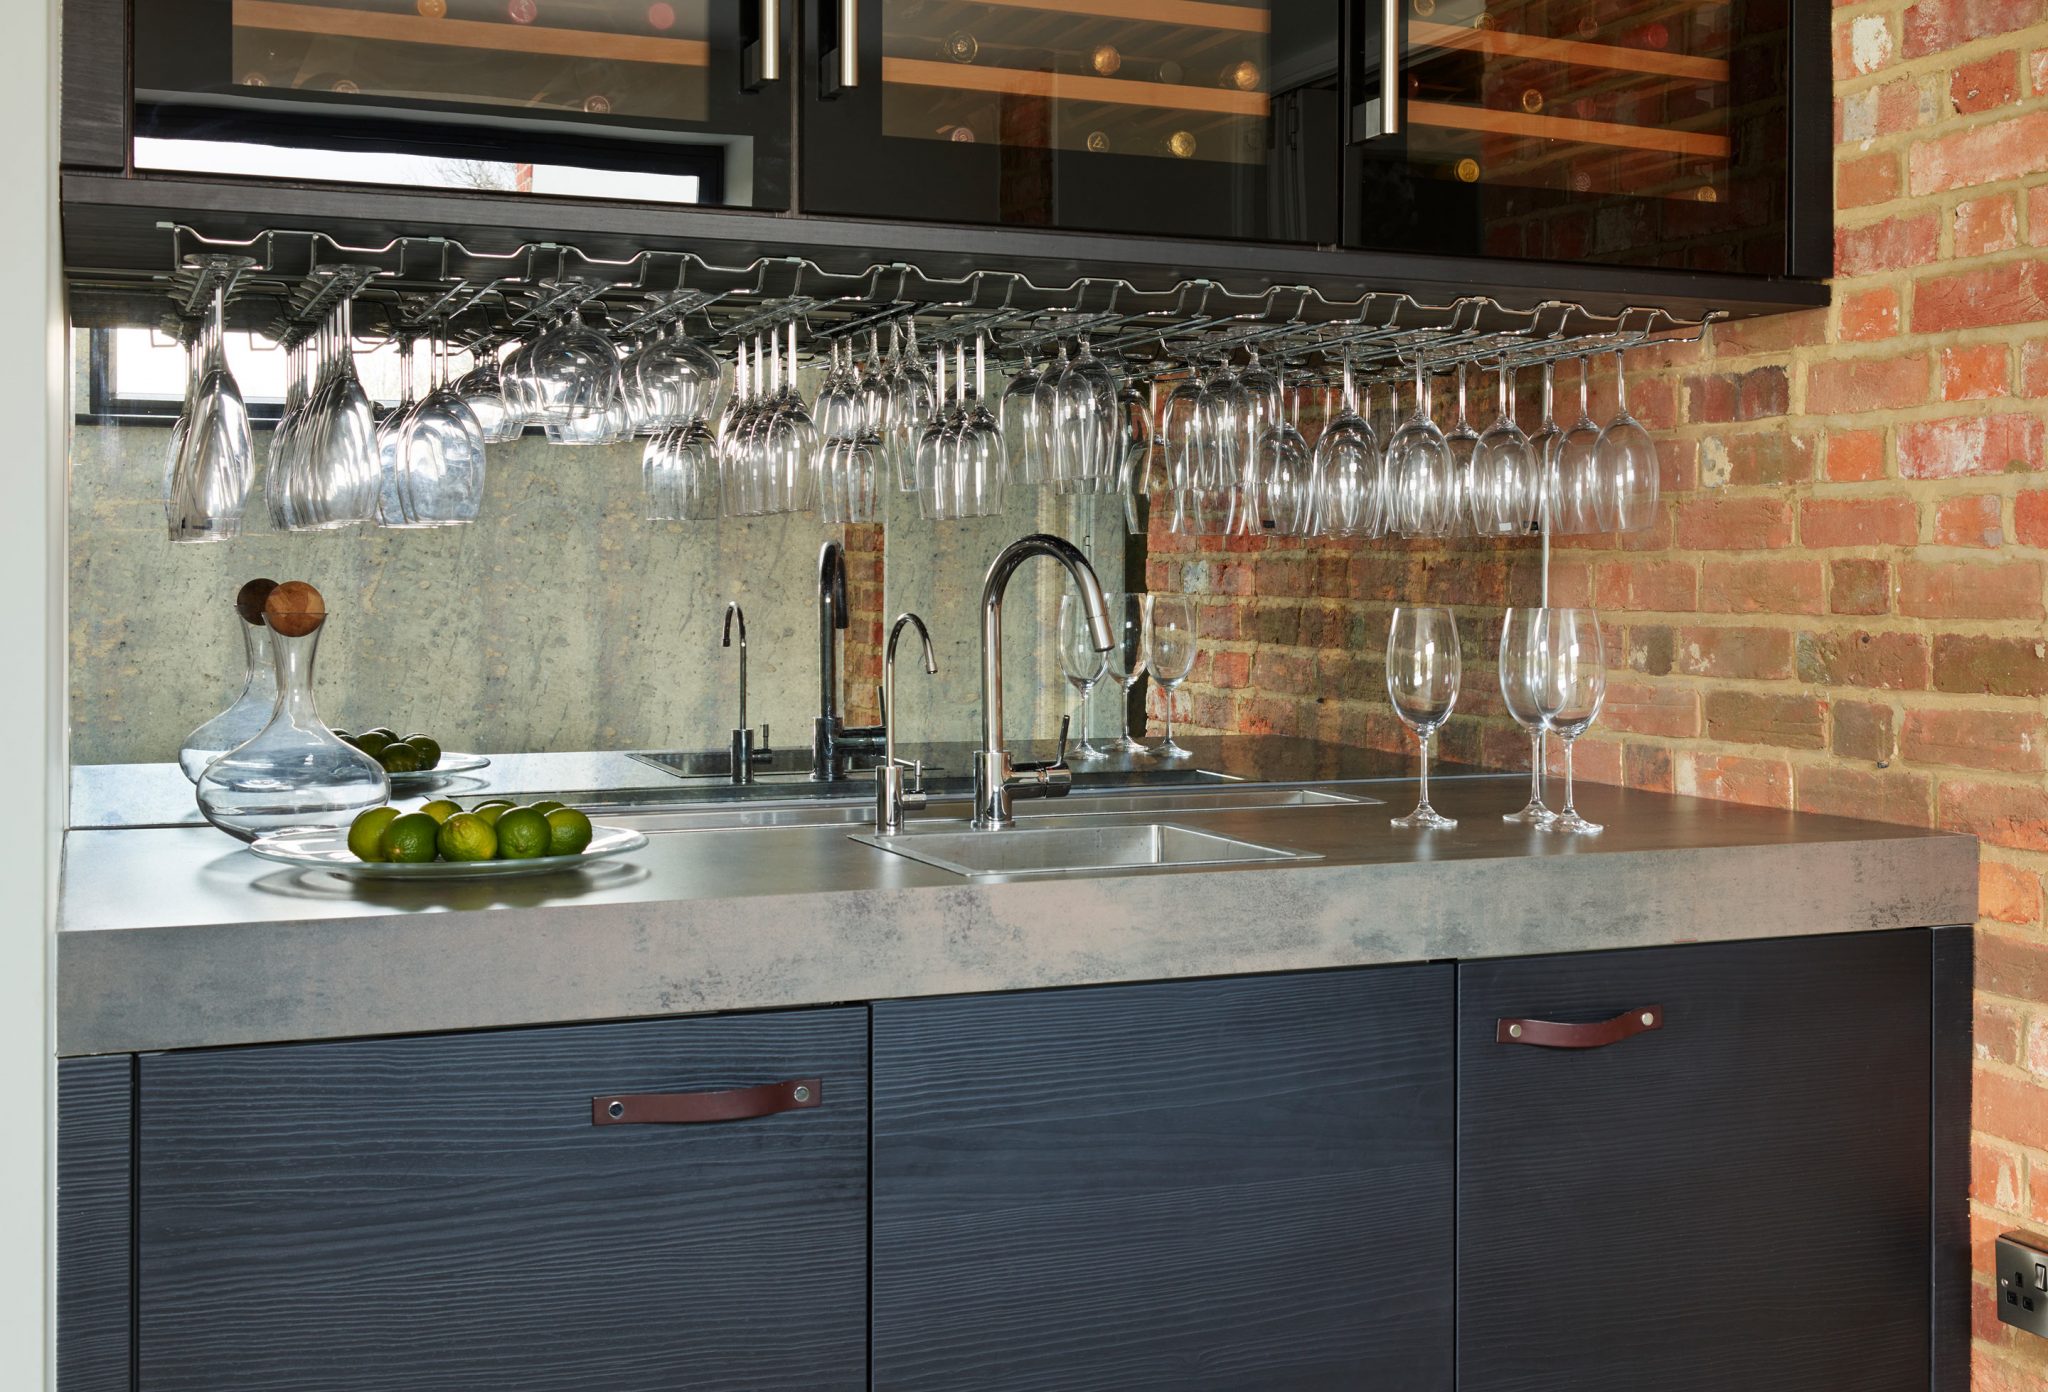 Three over-counter wine cooler units above bar area with grey composite marble counter-top and dark navy base units with leather handles